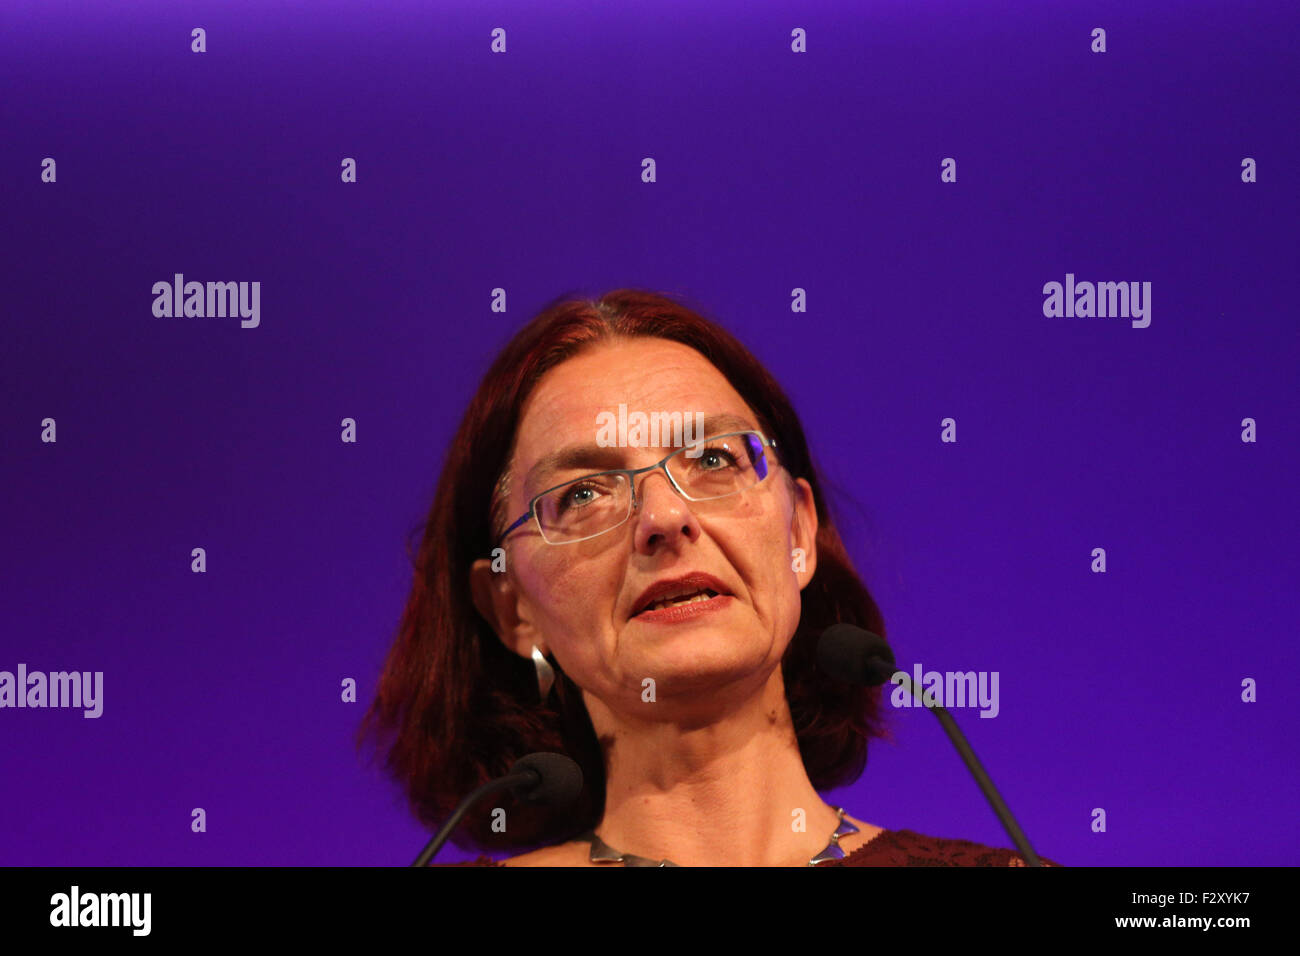 Doncaster, South Yorkshire, UK. 25th September, 2015. Helle Hagenau speaks at the UKIP National Conference in Doncaster South Yorkshire, UK. 25th September 2015. The party's annual conference was the stage for the unveiling of a new campaign force called 'Leave EU'. Consisting of pressure groups and think tanks with thousands of activists between them it will aim to end the UK’s ties with Brussels.  Ian Hinchliffe / /Alamy Live News Stock Photo